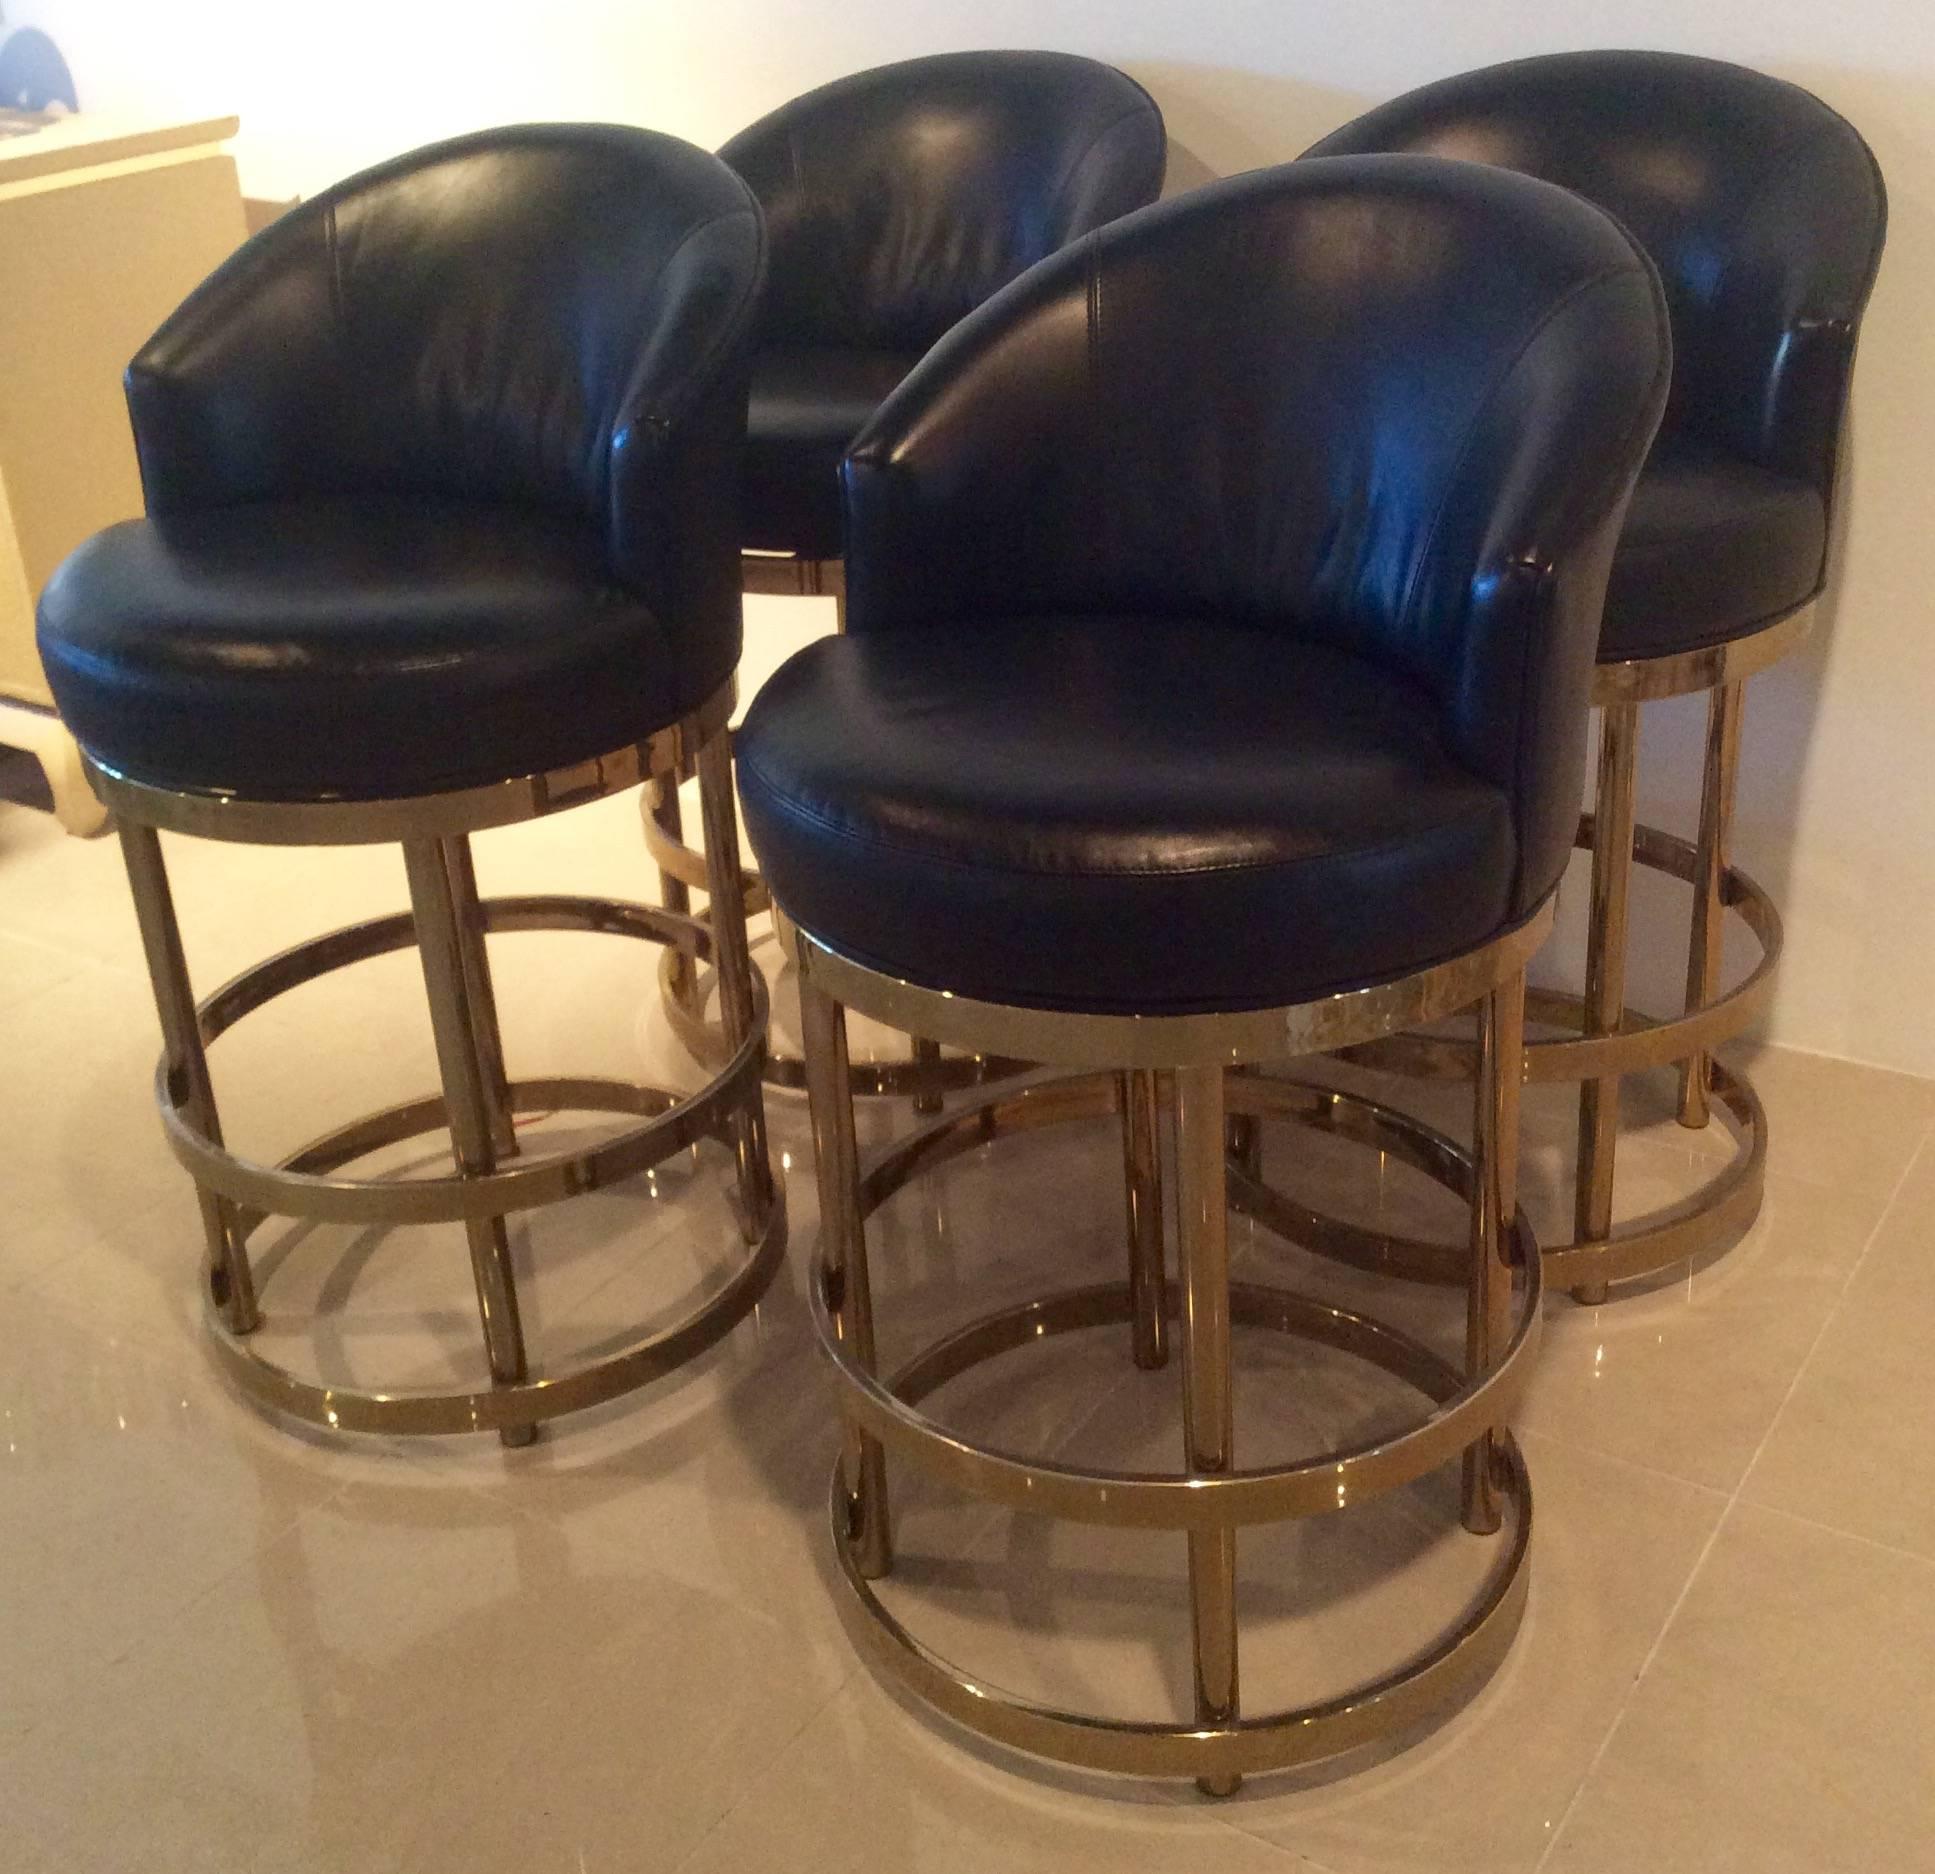 The most amazing set of 4 (four) vintage brass swivel counter or barstools with black leather seats. The leather is in excellent condition with a few minor imperfections. The brass gold base has a few scuffs, tarnishing areas but nothing that